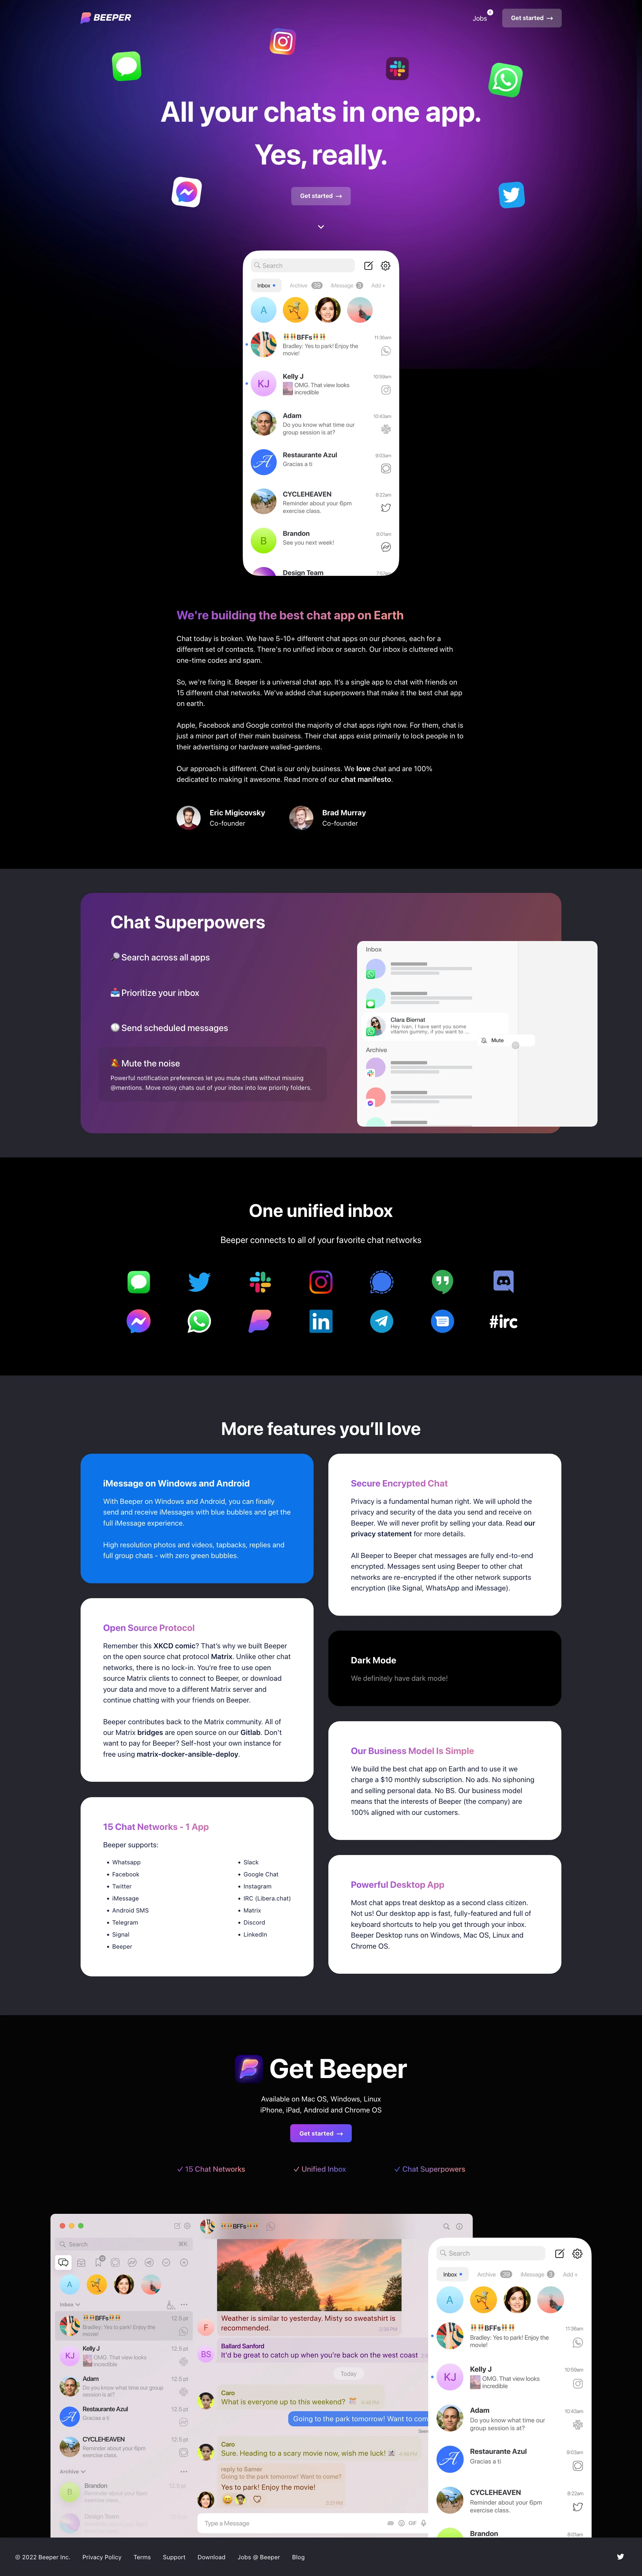 Beeper Landing Page Example: A single app to chat on iMessage, WhatsApp, and 13 other chat networks. You can search, snooze, or archive messages. And with a unified inbox, you’ll never miss a message again.